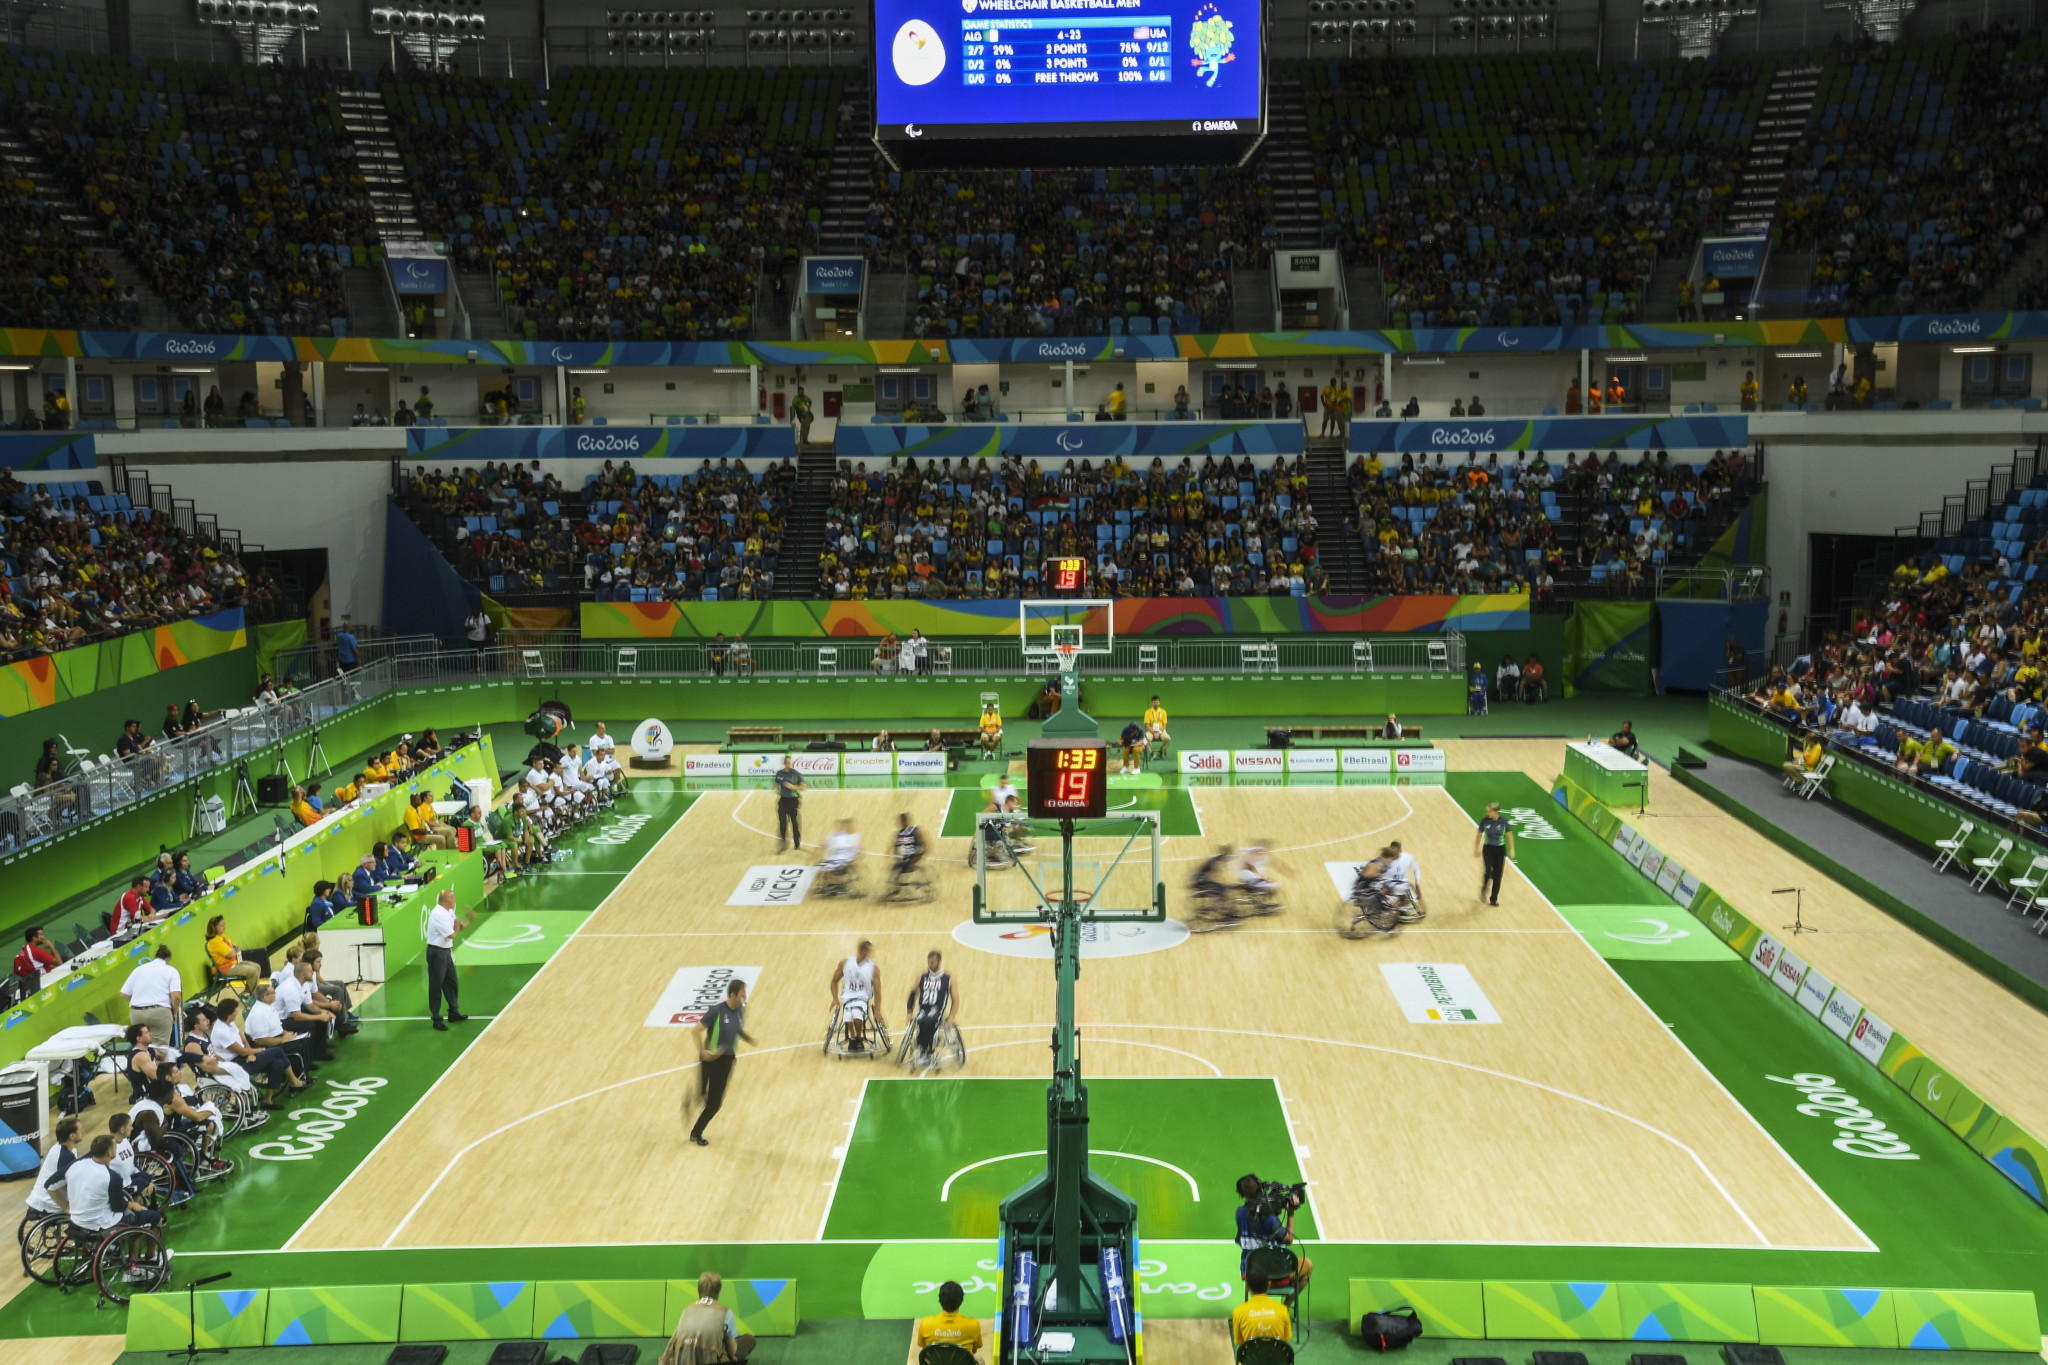 IWBF signs content agreement with Olympic Channel